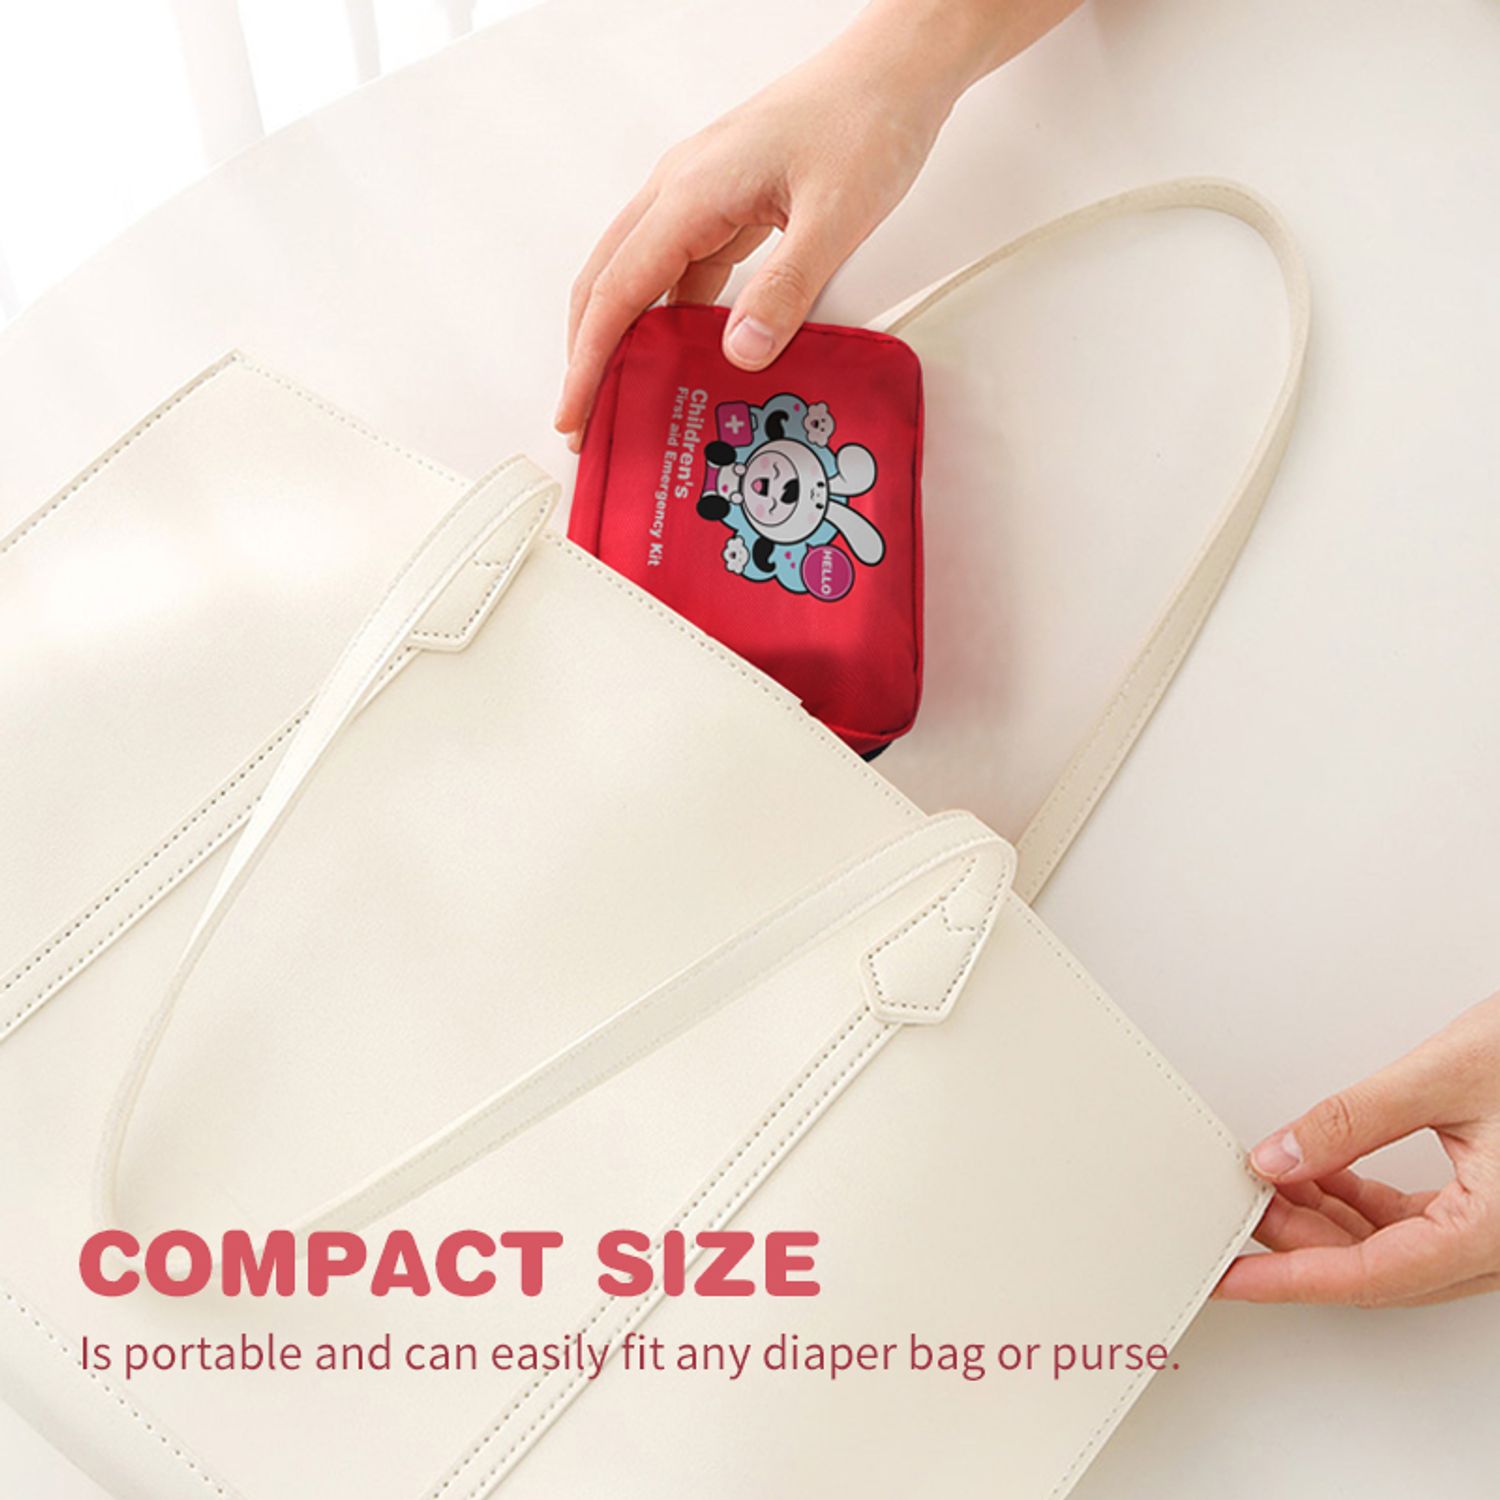 Compact baby first aid kit fitting into a white purse, showcasing portability and diaper bag compatibility